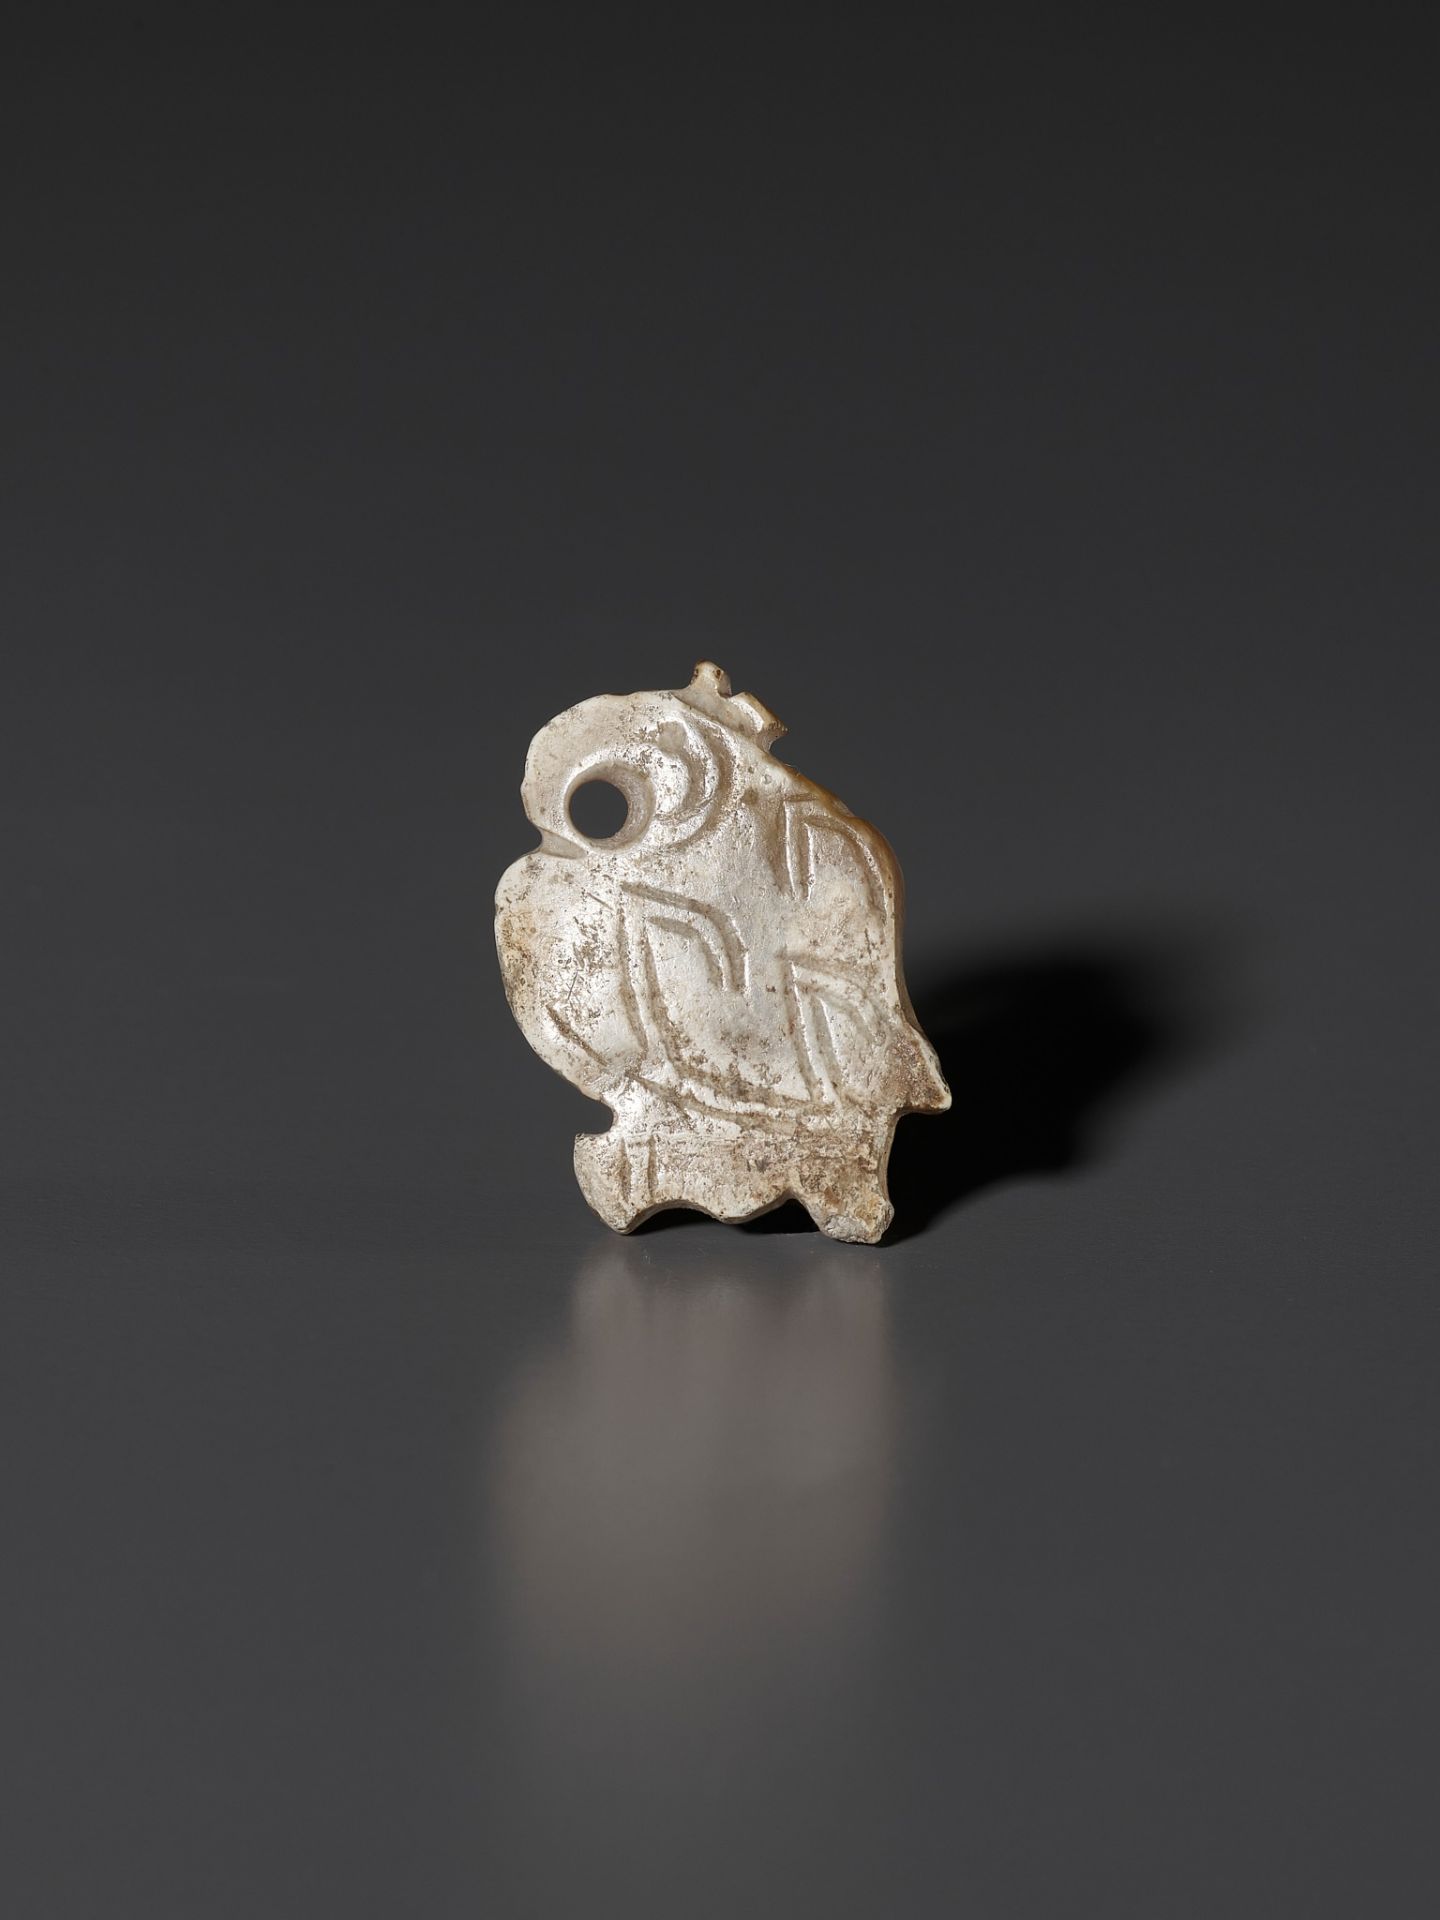 A PALE CELADON AND RUSSET JADE 'BIRD' PENDANT, LATE SHANG DYNASTY - Image 2 of 9